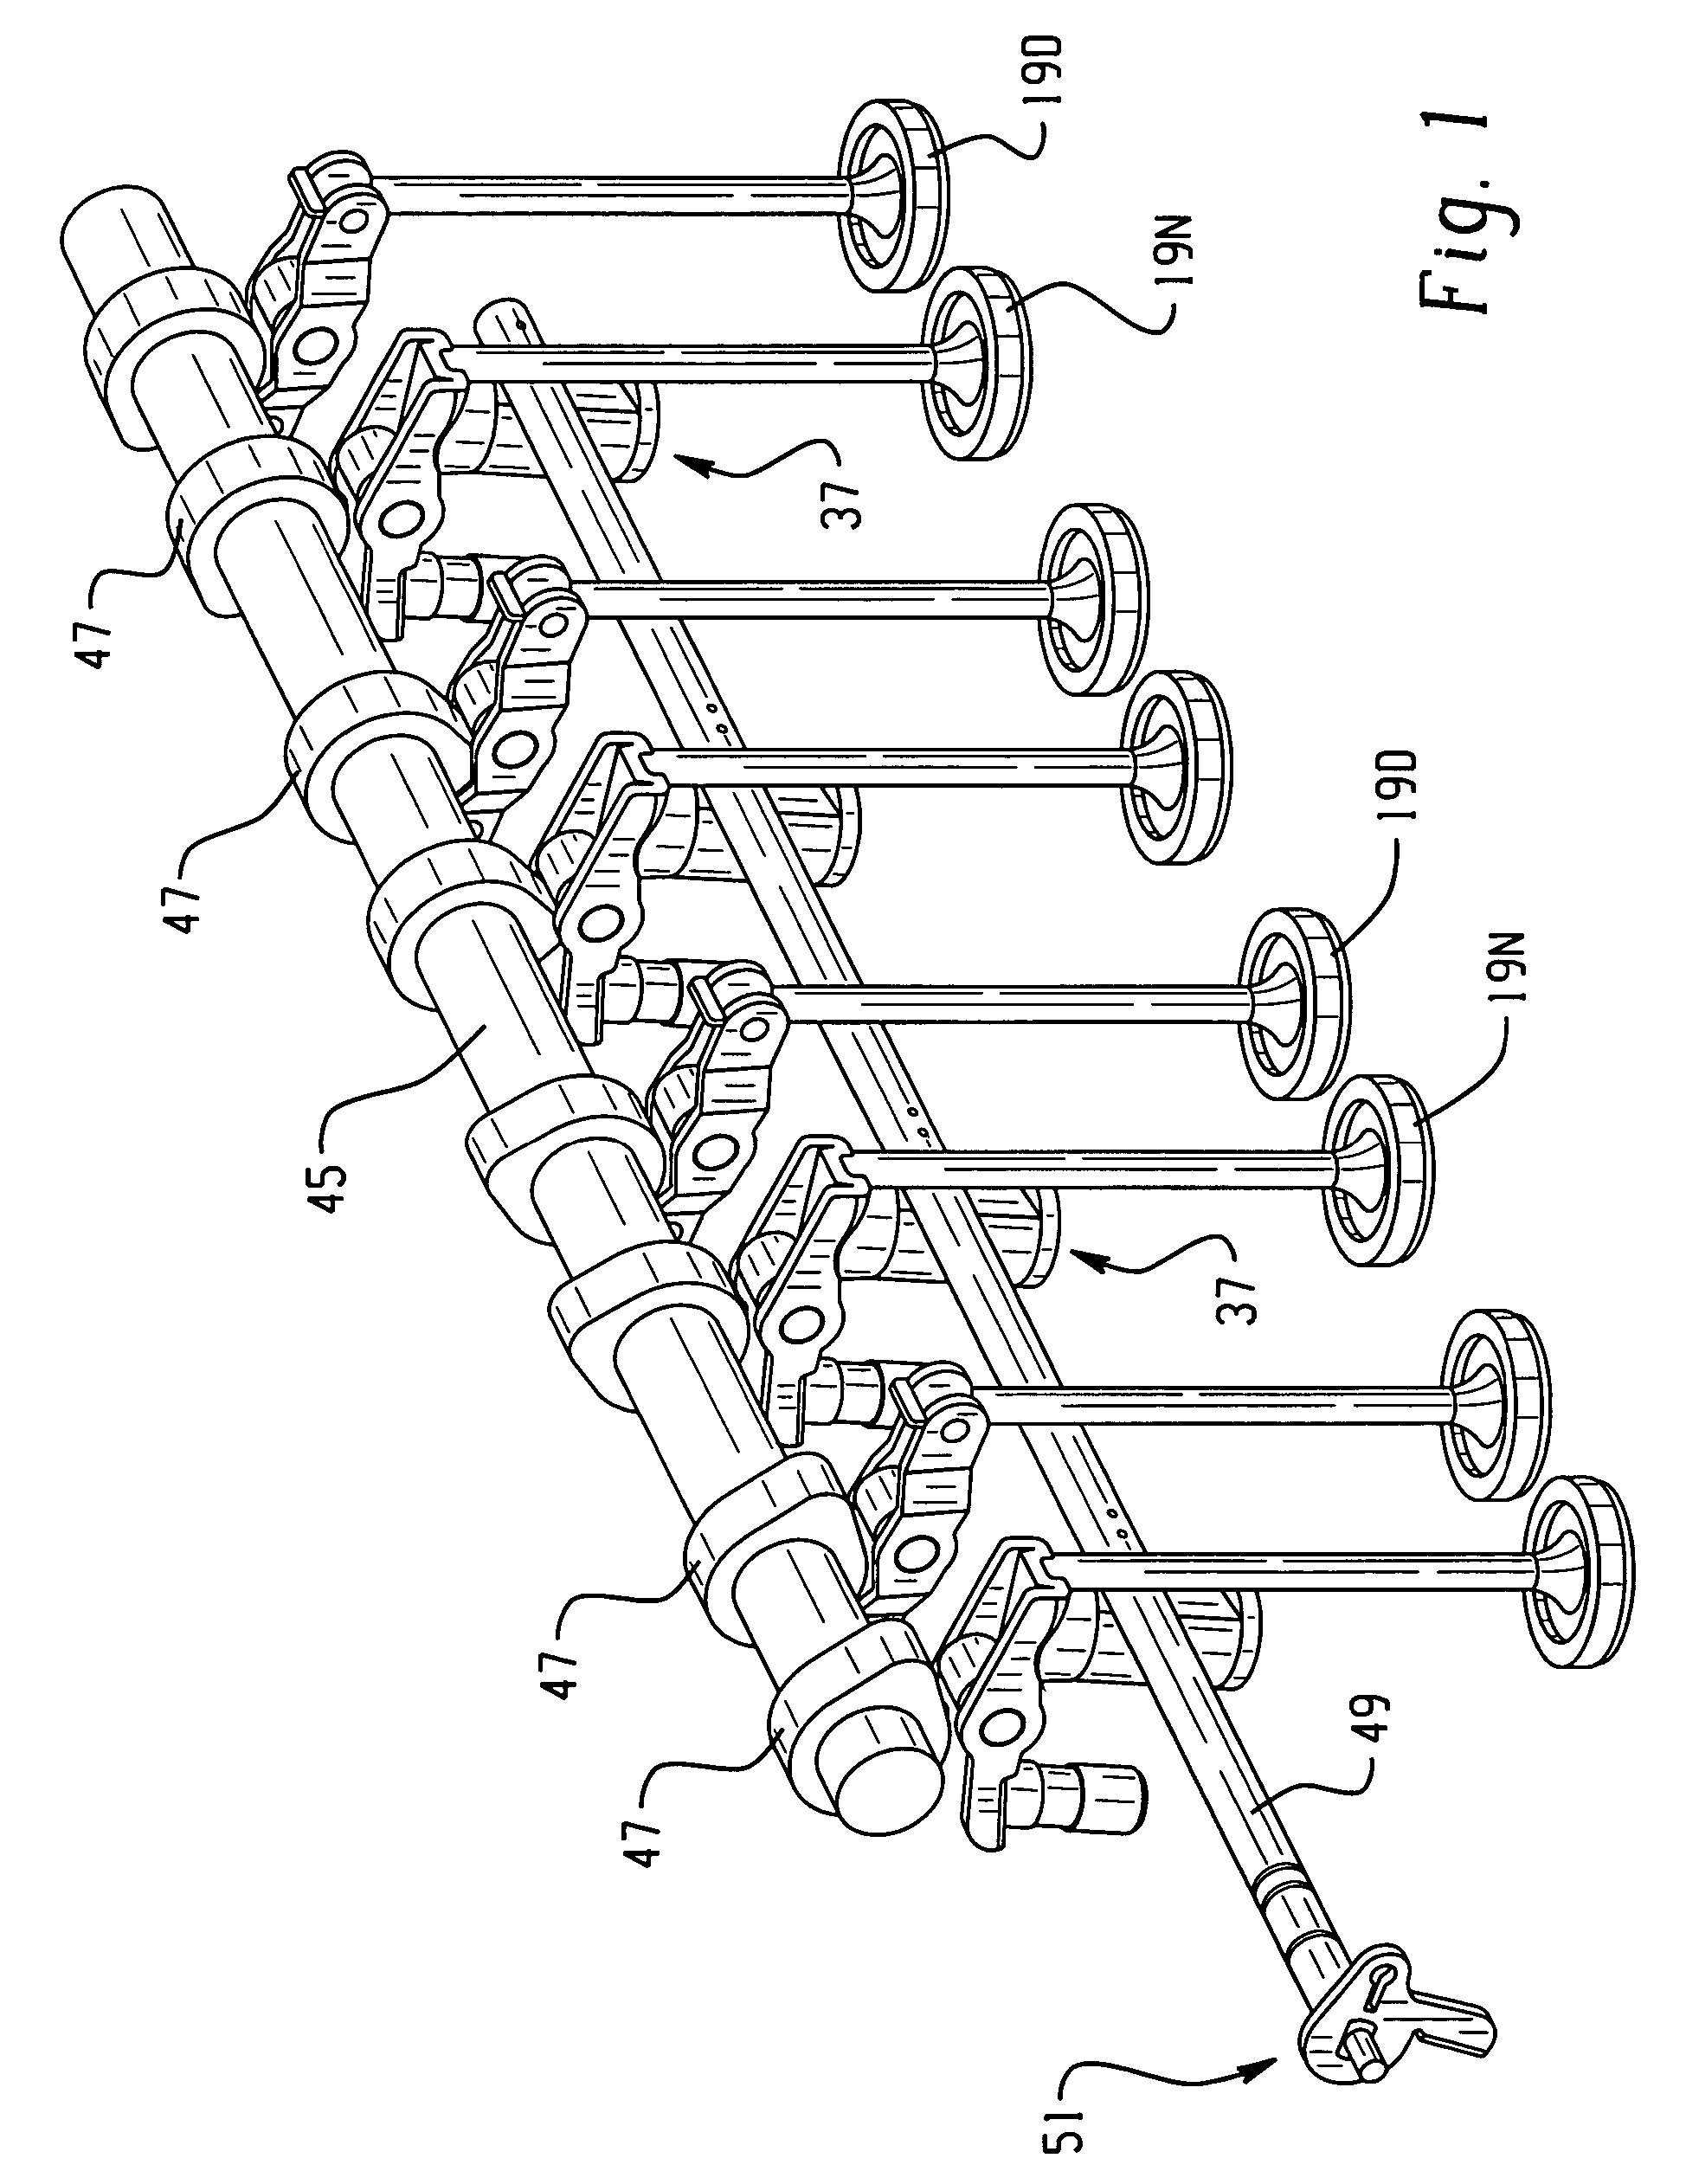 Valve deactivation system and improved latchable HLA therefor